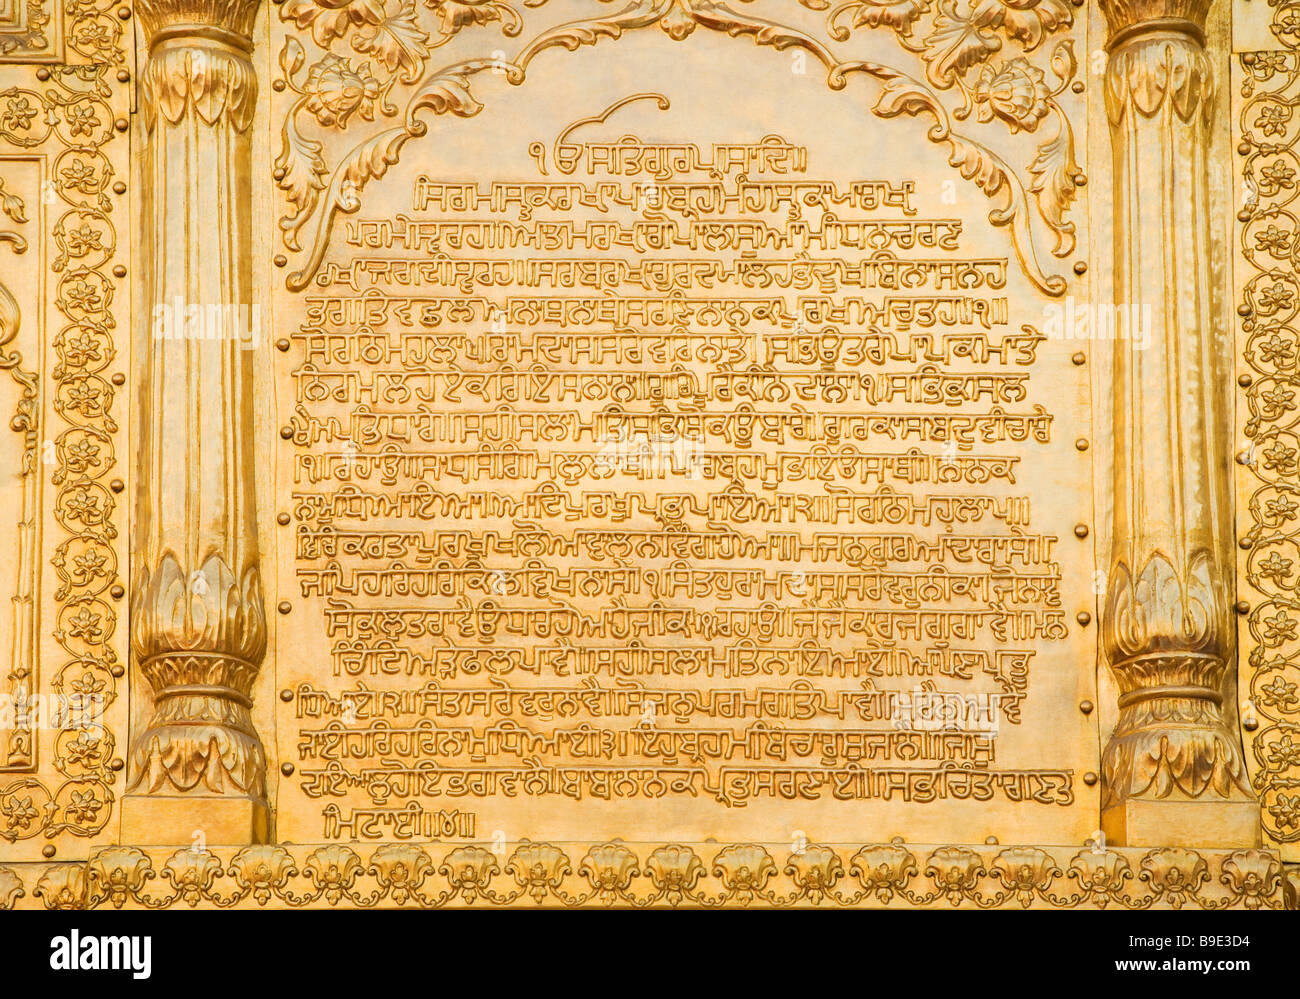 Text carved on the wall of a temple, Golden Temple, Amritsar, Punjab, India Stock Photo